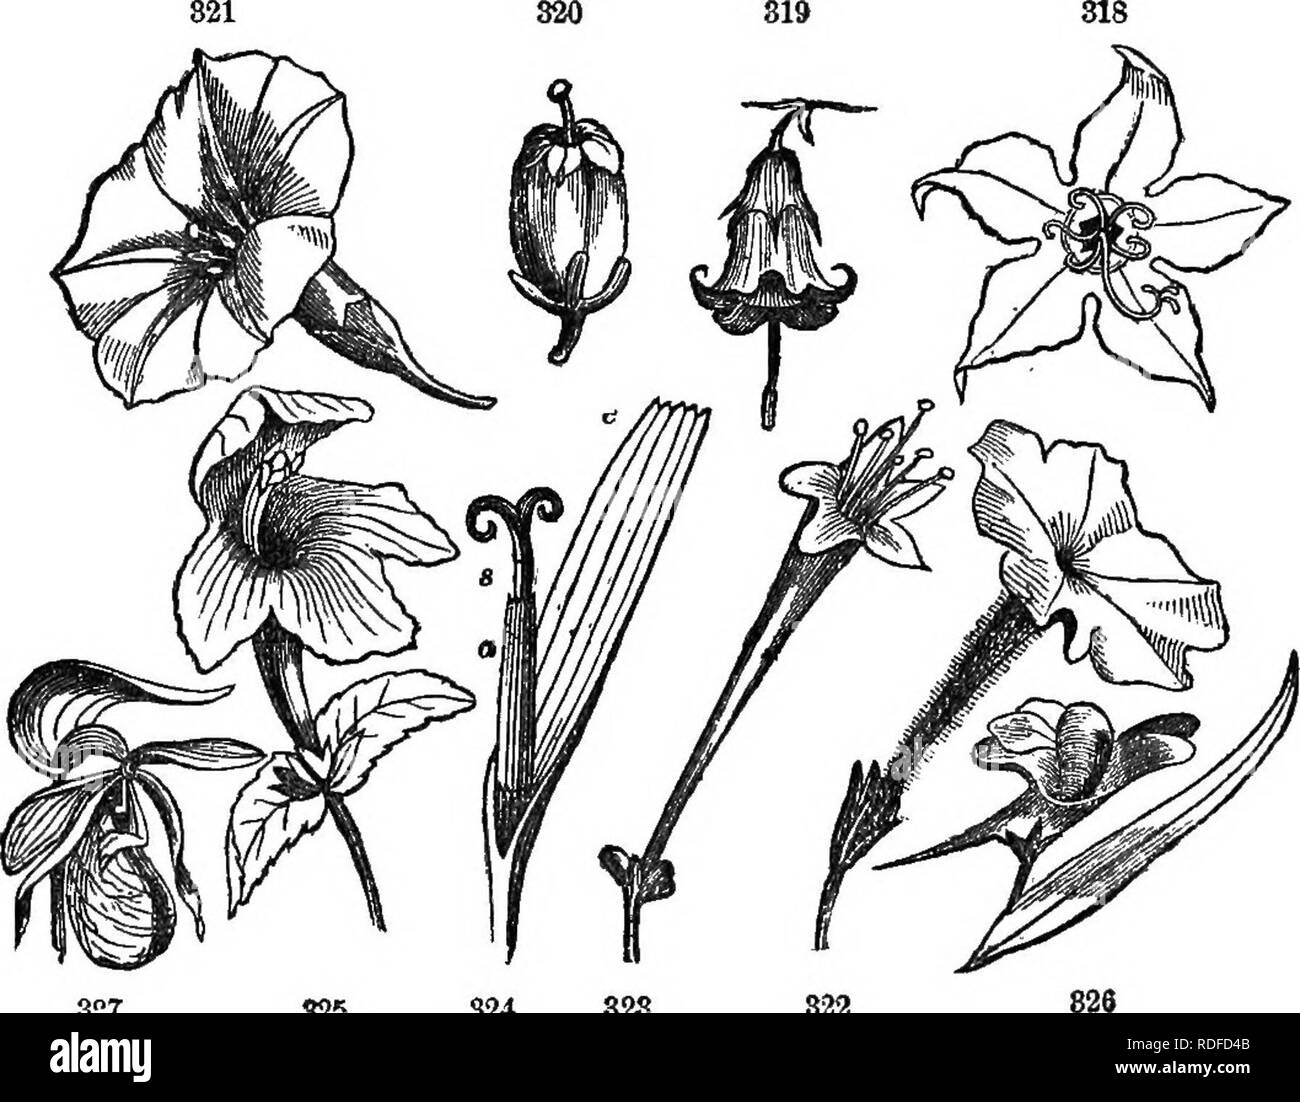 . Class-book of botany : being outlines of the structure, physiology, and classification of plants ; with a flora of the United States and Canada . Botany; Botany; Botany. THB FLORAL ENVELOPS, OR PERIANTH. 97 478. Uboeolate, um-shaped; an oblong or globular corolla with a narrow opening, as the whortleberry, heath. 479. Funnel-form (infundibuliform), narrow tubular below, gradu- ally enlarging to the border, as ihorning-glory. 480. Salveb-fobm (hypocrateriform), the tube ending abruptly in a horizontal border, as in Phlox, Petunia, both of which are slightly ir- regular. 481. Tubular, a cylind Stock Photo